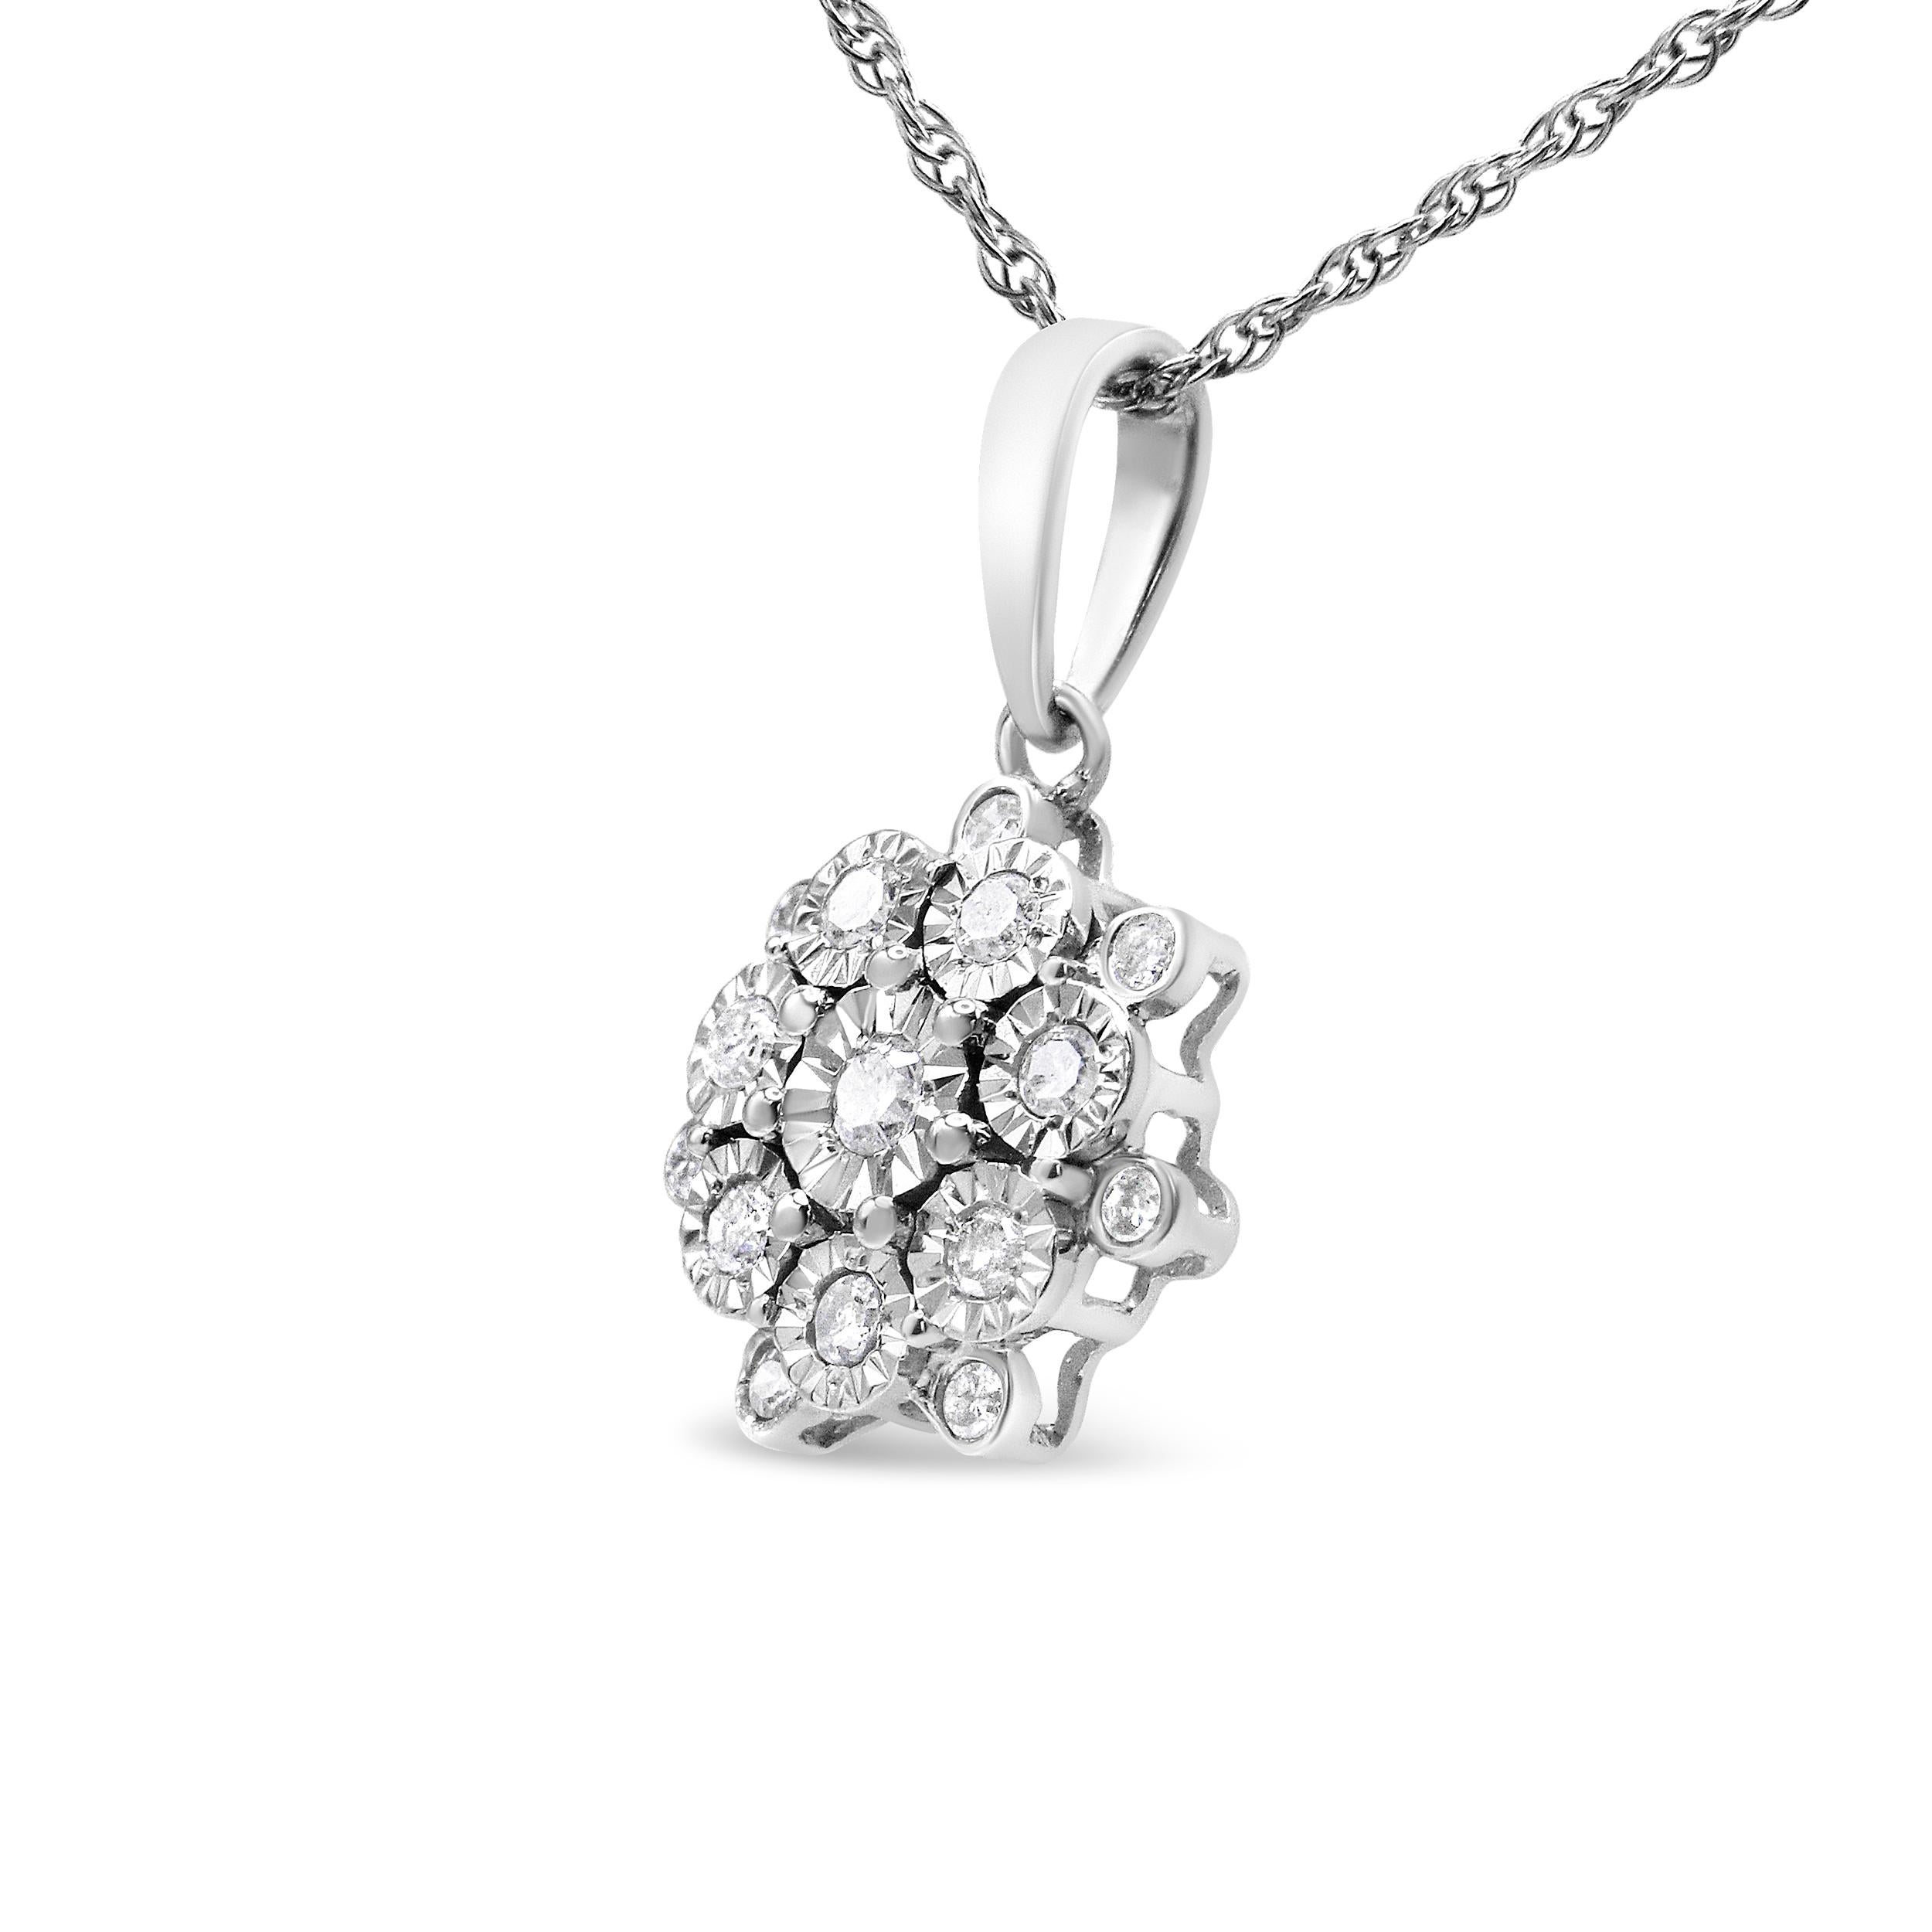 Sparkling with natural stones, this beautiful pendant has a unique floral cluster design that will pair well with any outfit you put on. The necklace is crafted in genuine .925 sterling silver, a metal that will shine and stay tarnish free for years